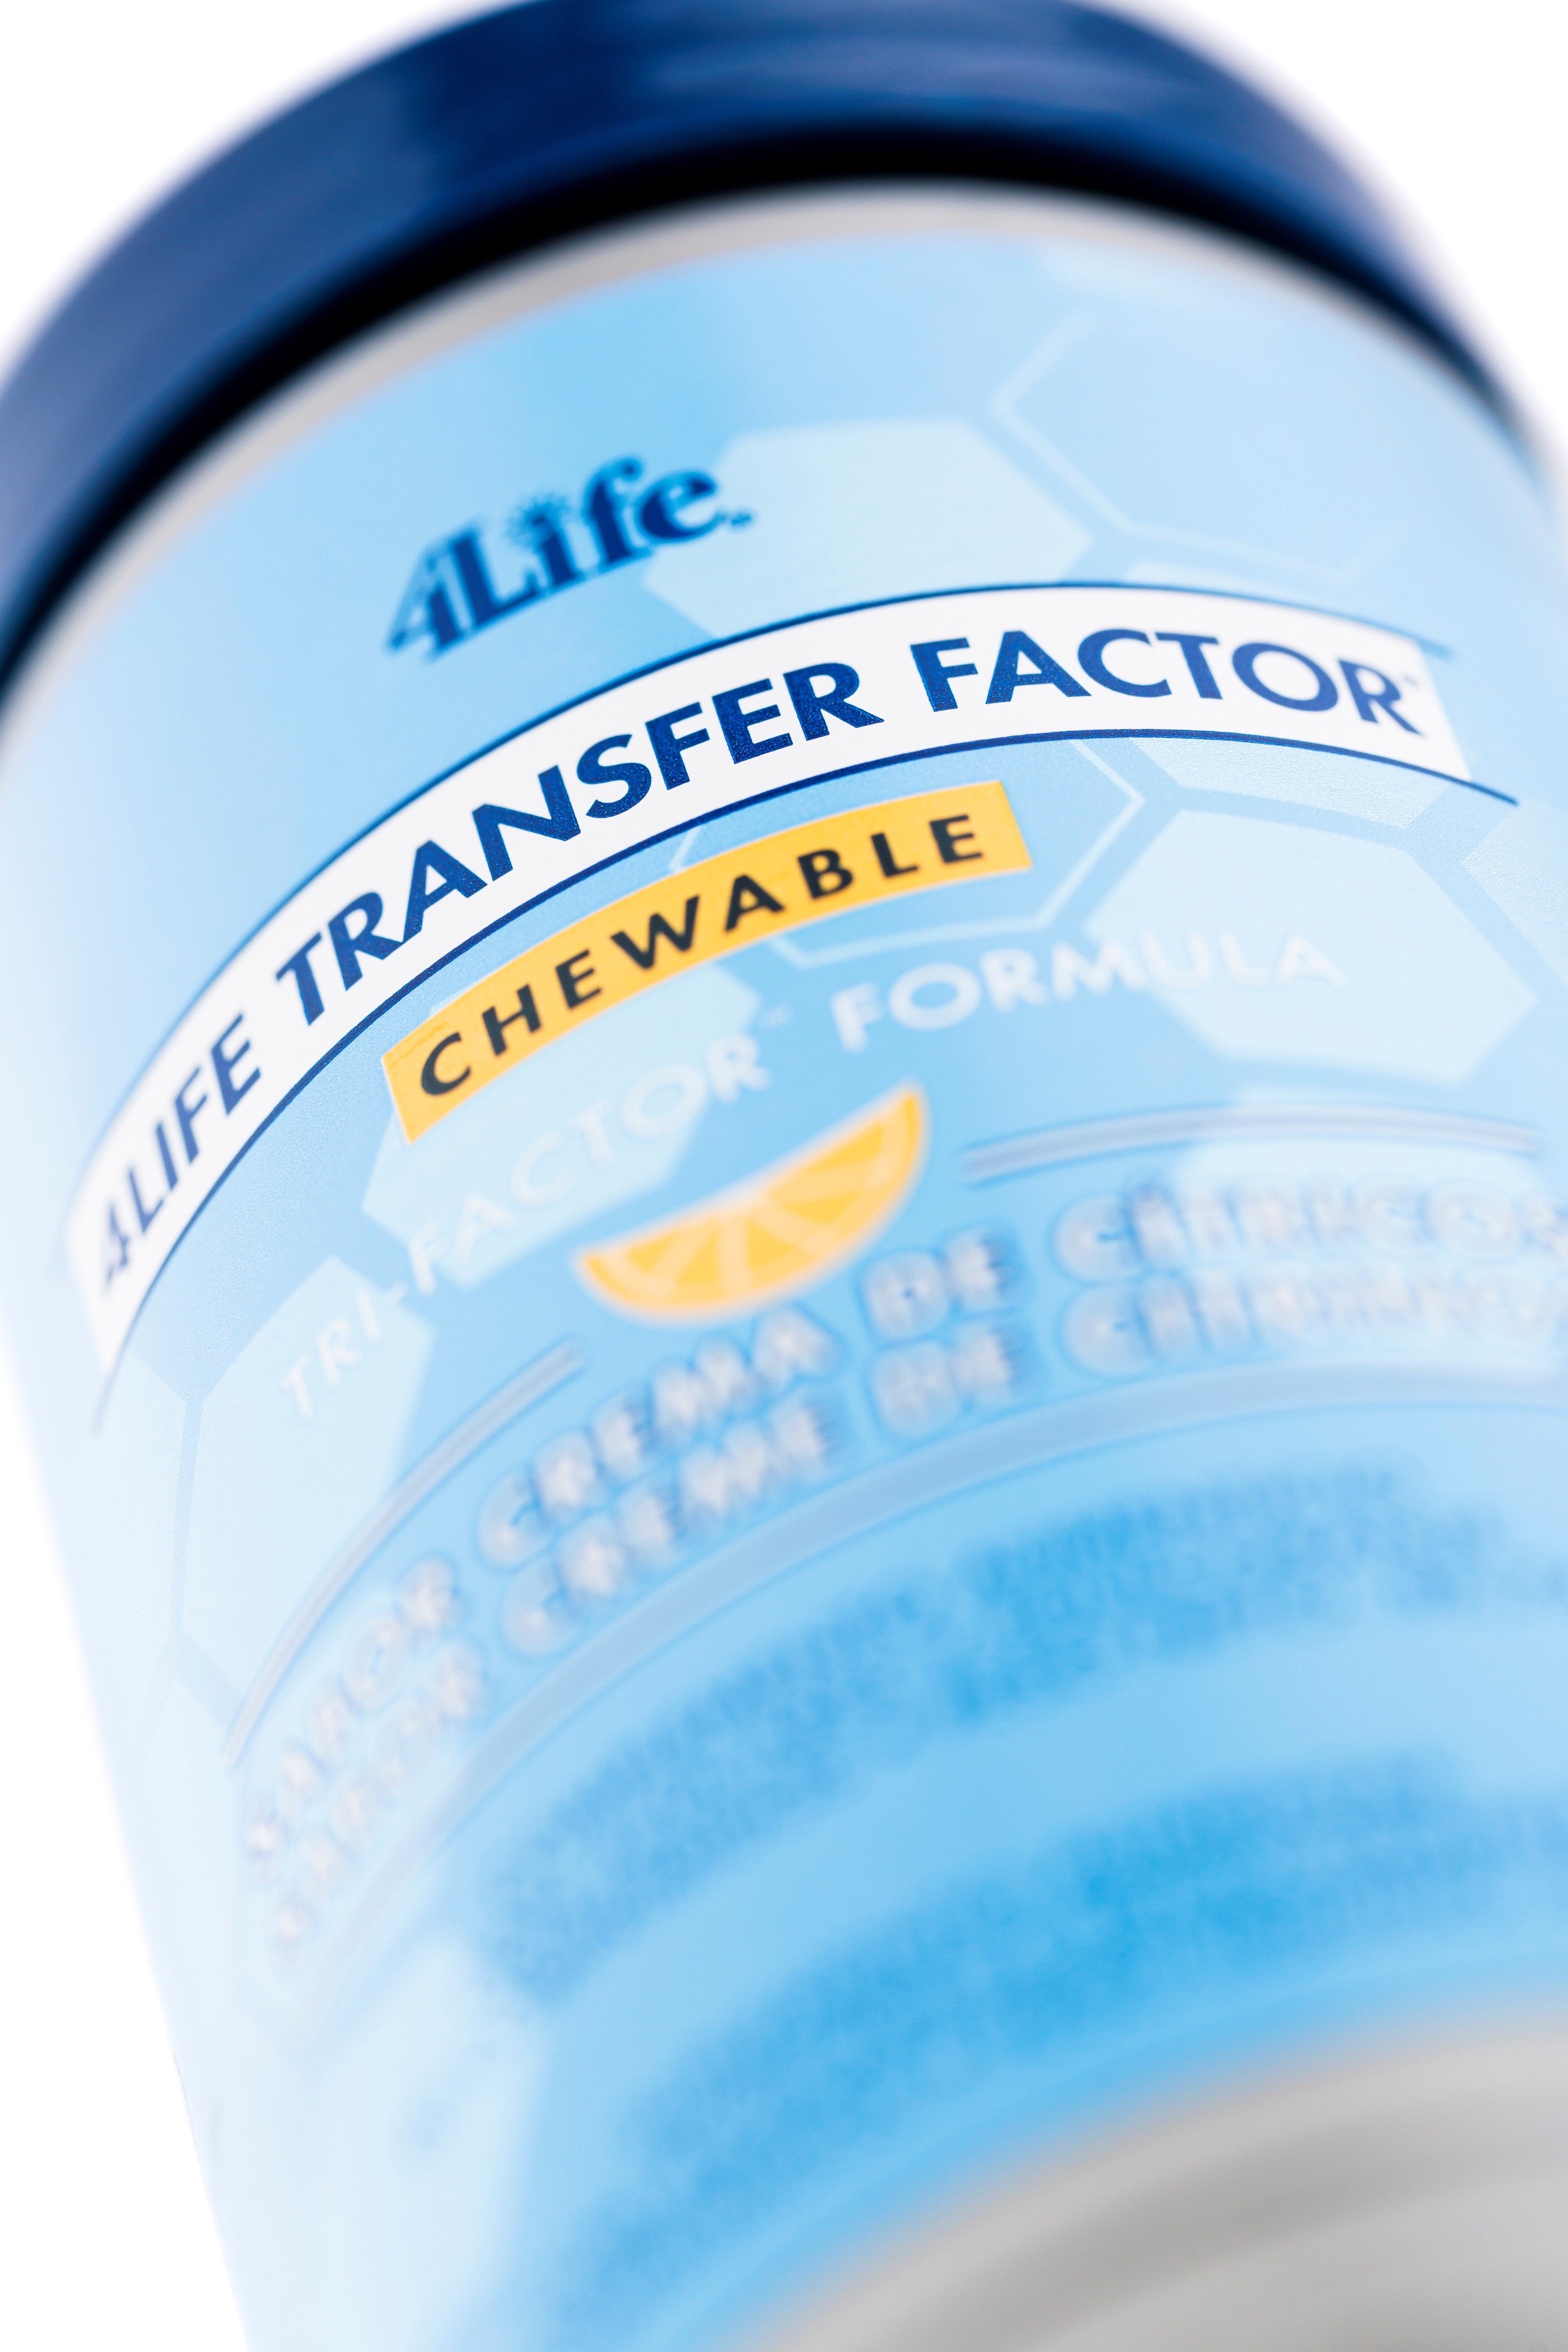 4Life Transfer Factor® Chewable Tri-Factor (90 Chewable Tablets)